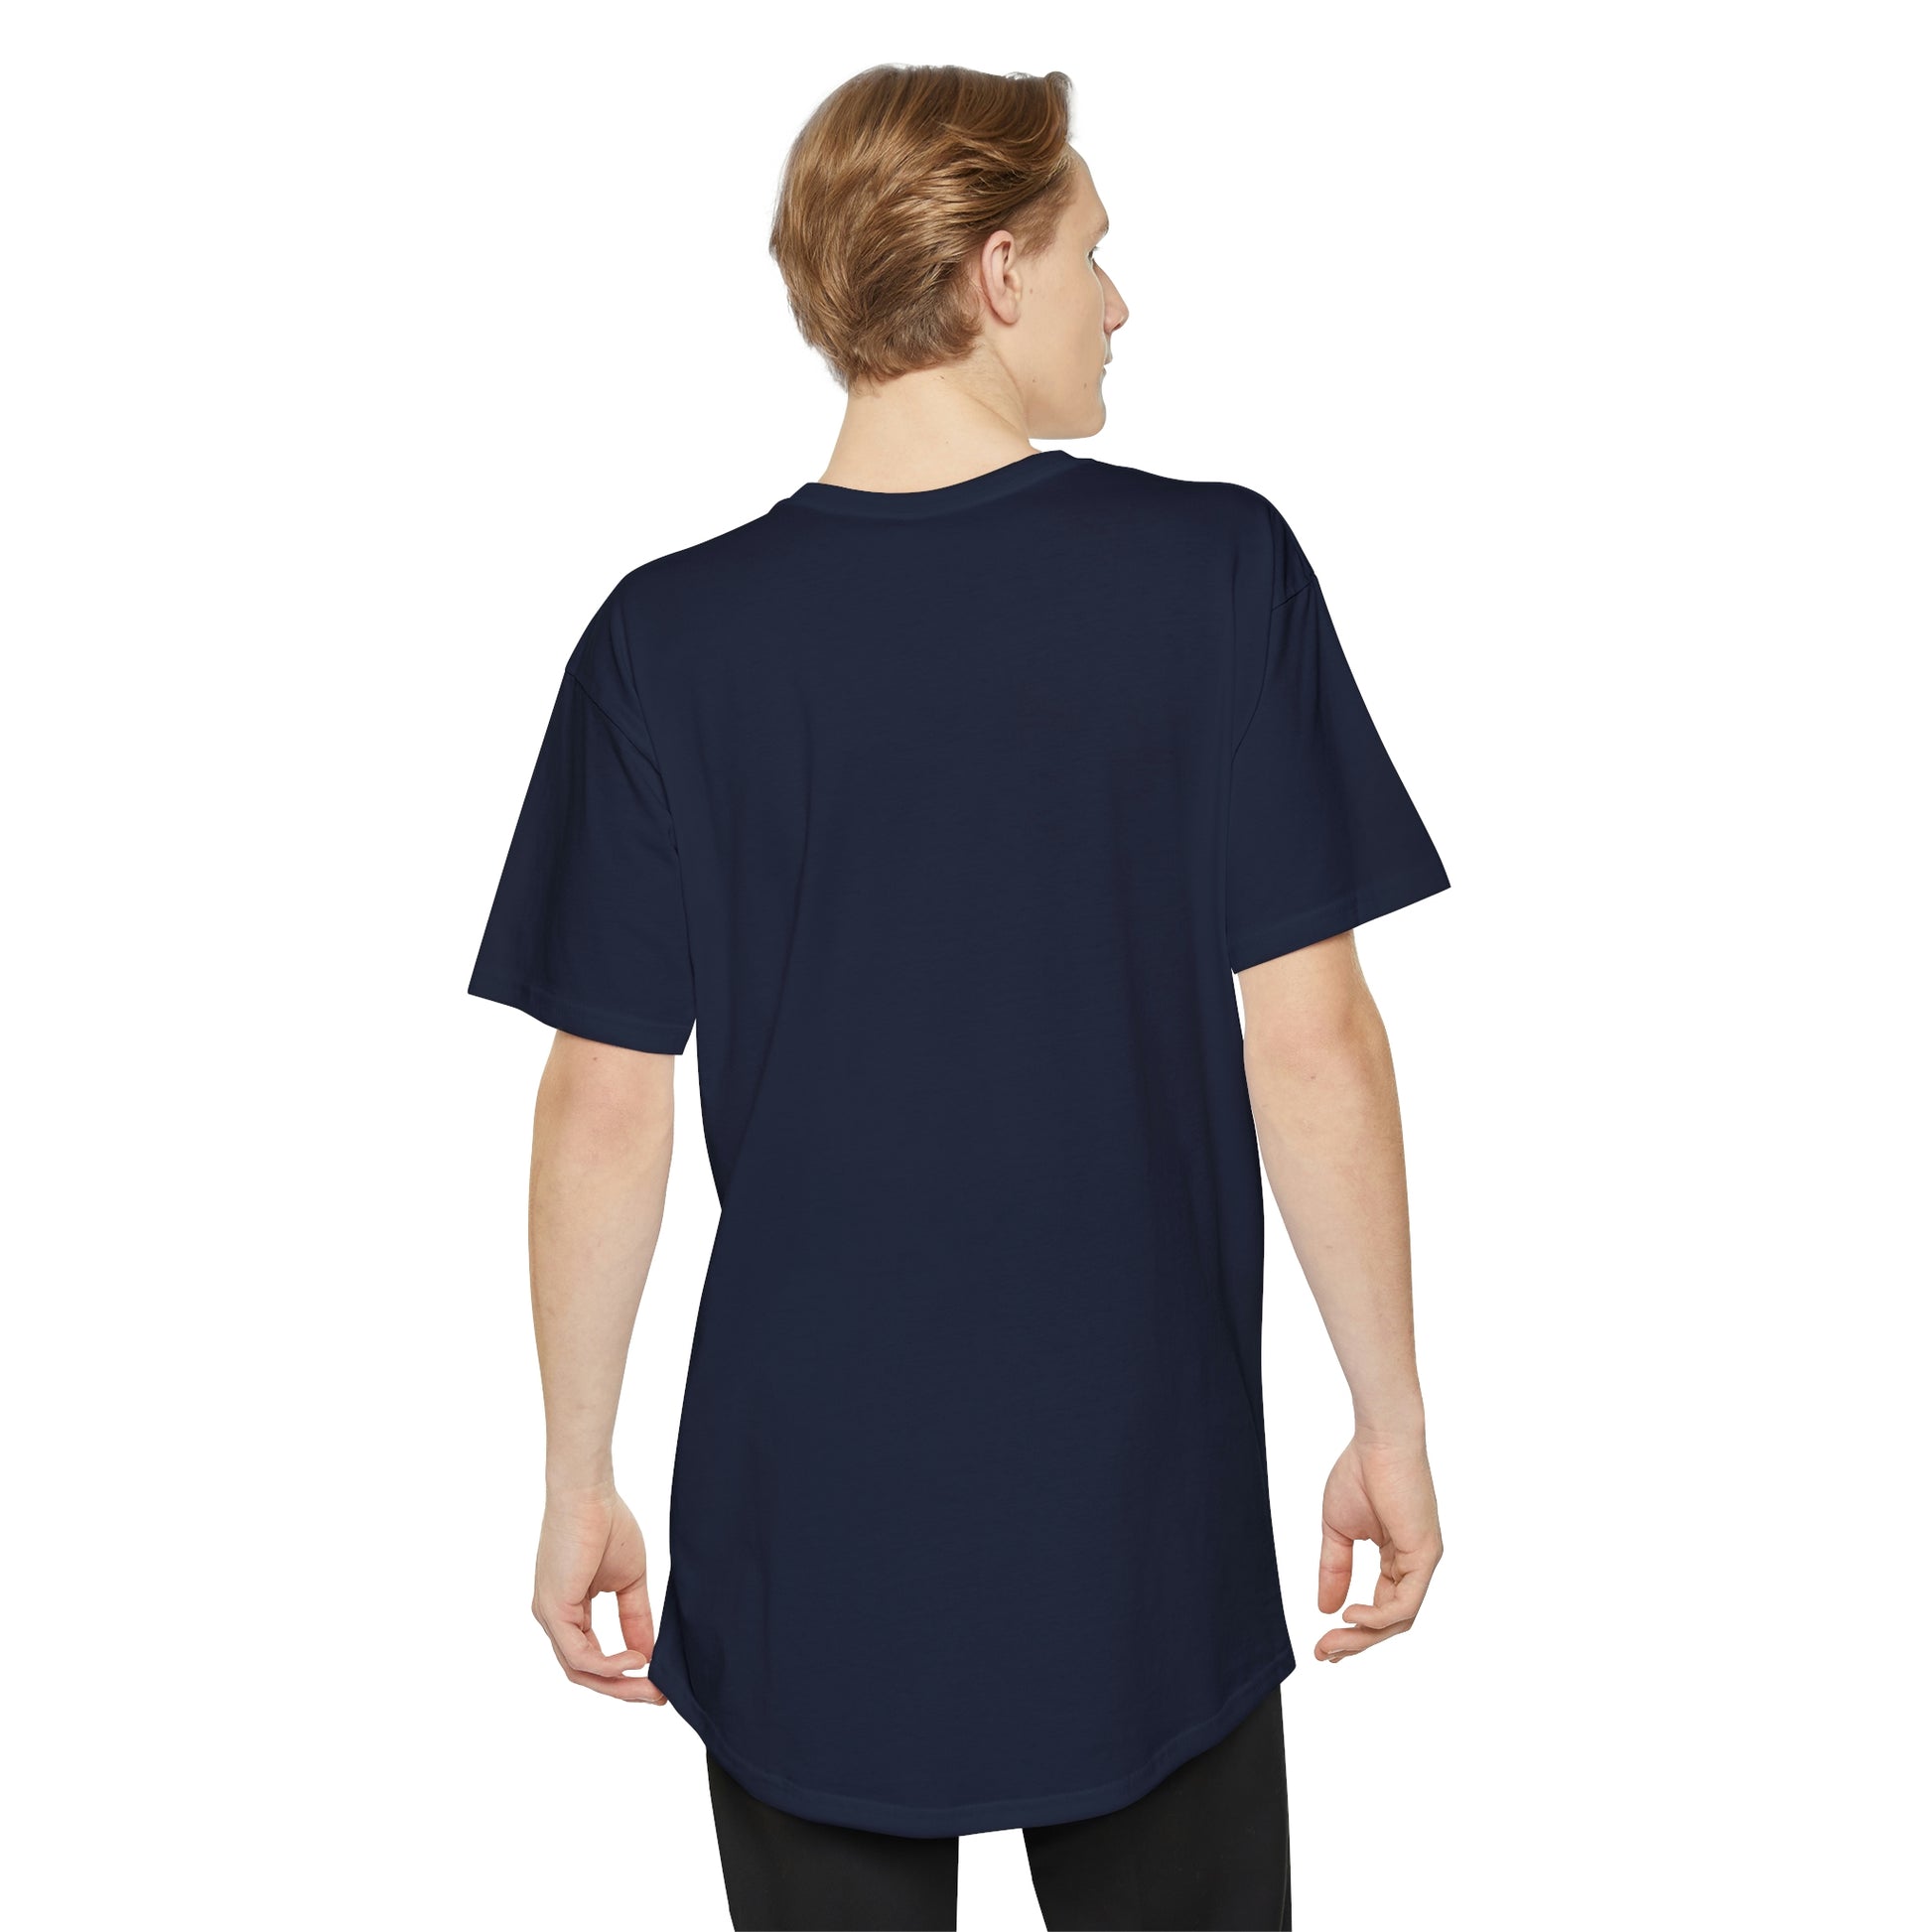 Mock up of a standing man showing the back of the Navy Blue t-shirt